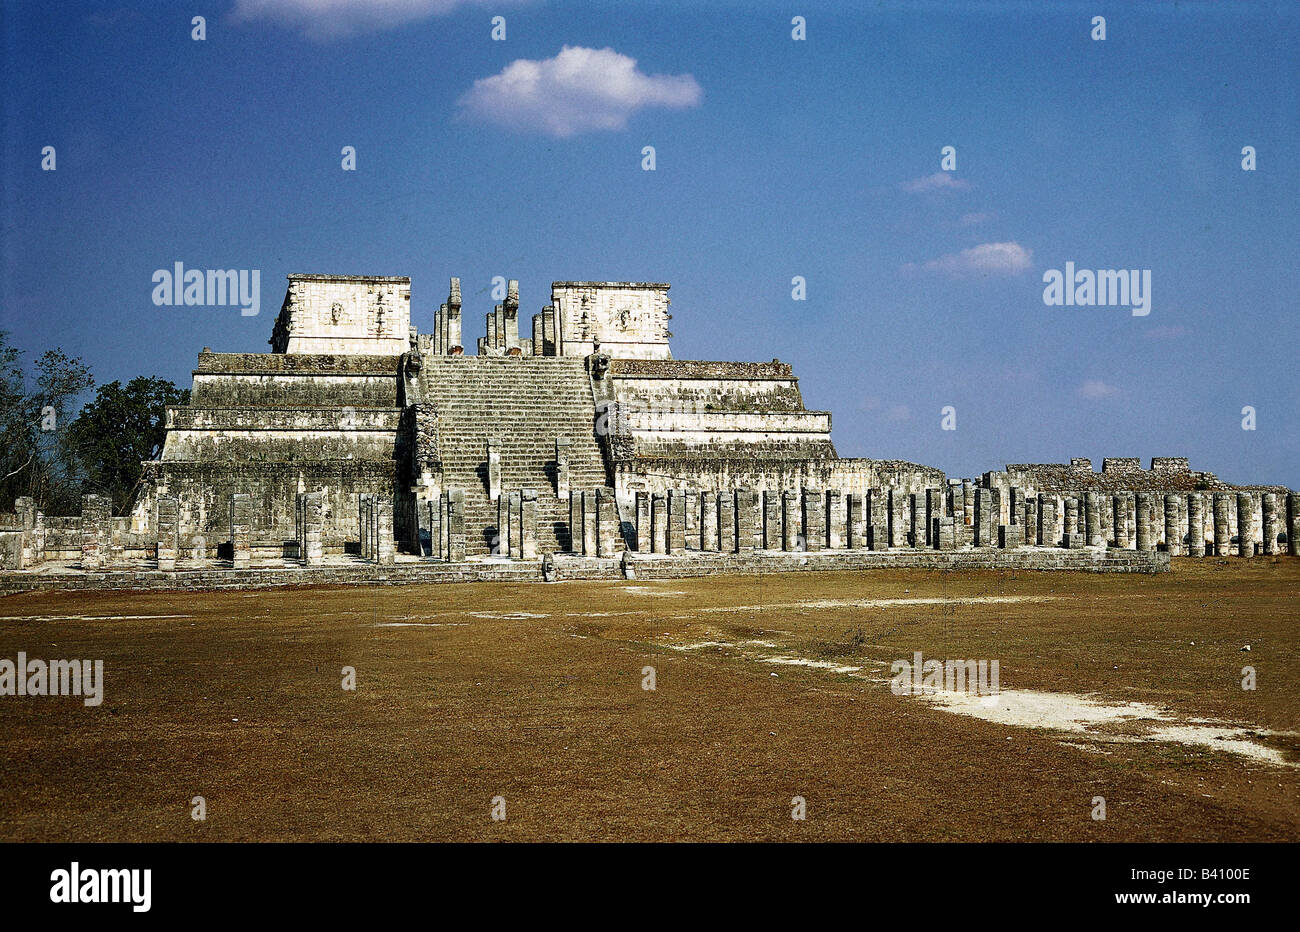 geography / travel, Mexico, Chichen Itza, Maya town, founded in 5th century AD, extended in Puuc style 7th - 10th century AD, populated by Toltecs, 'Iglesia', detail, temple of the warrior, view, architecture, fine arts, America, Mayas, religion, UNESCO, World Heritage Site, Yucatan, America, central America, latin-american indians, historical, historic, ancient, stones, fifth, seventh, tenth, latin american, , Stock Photo